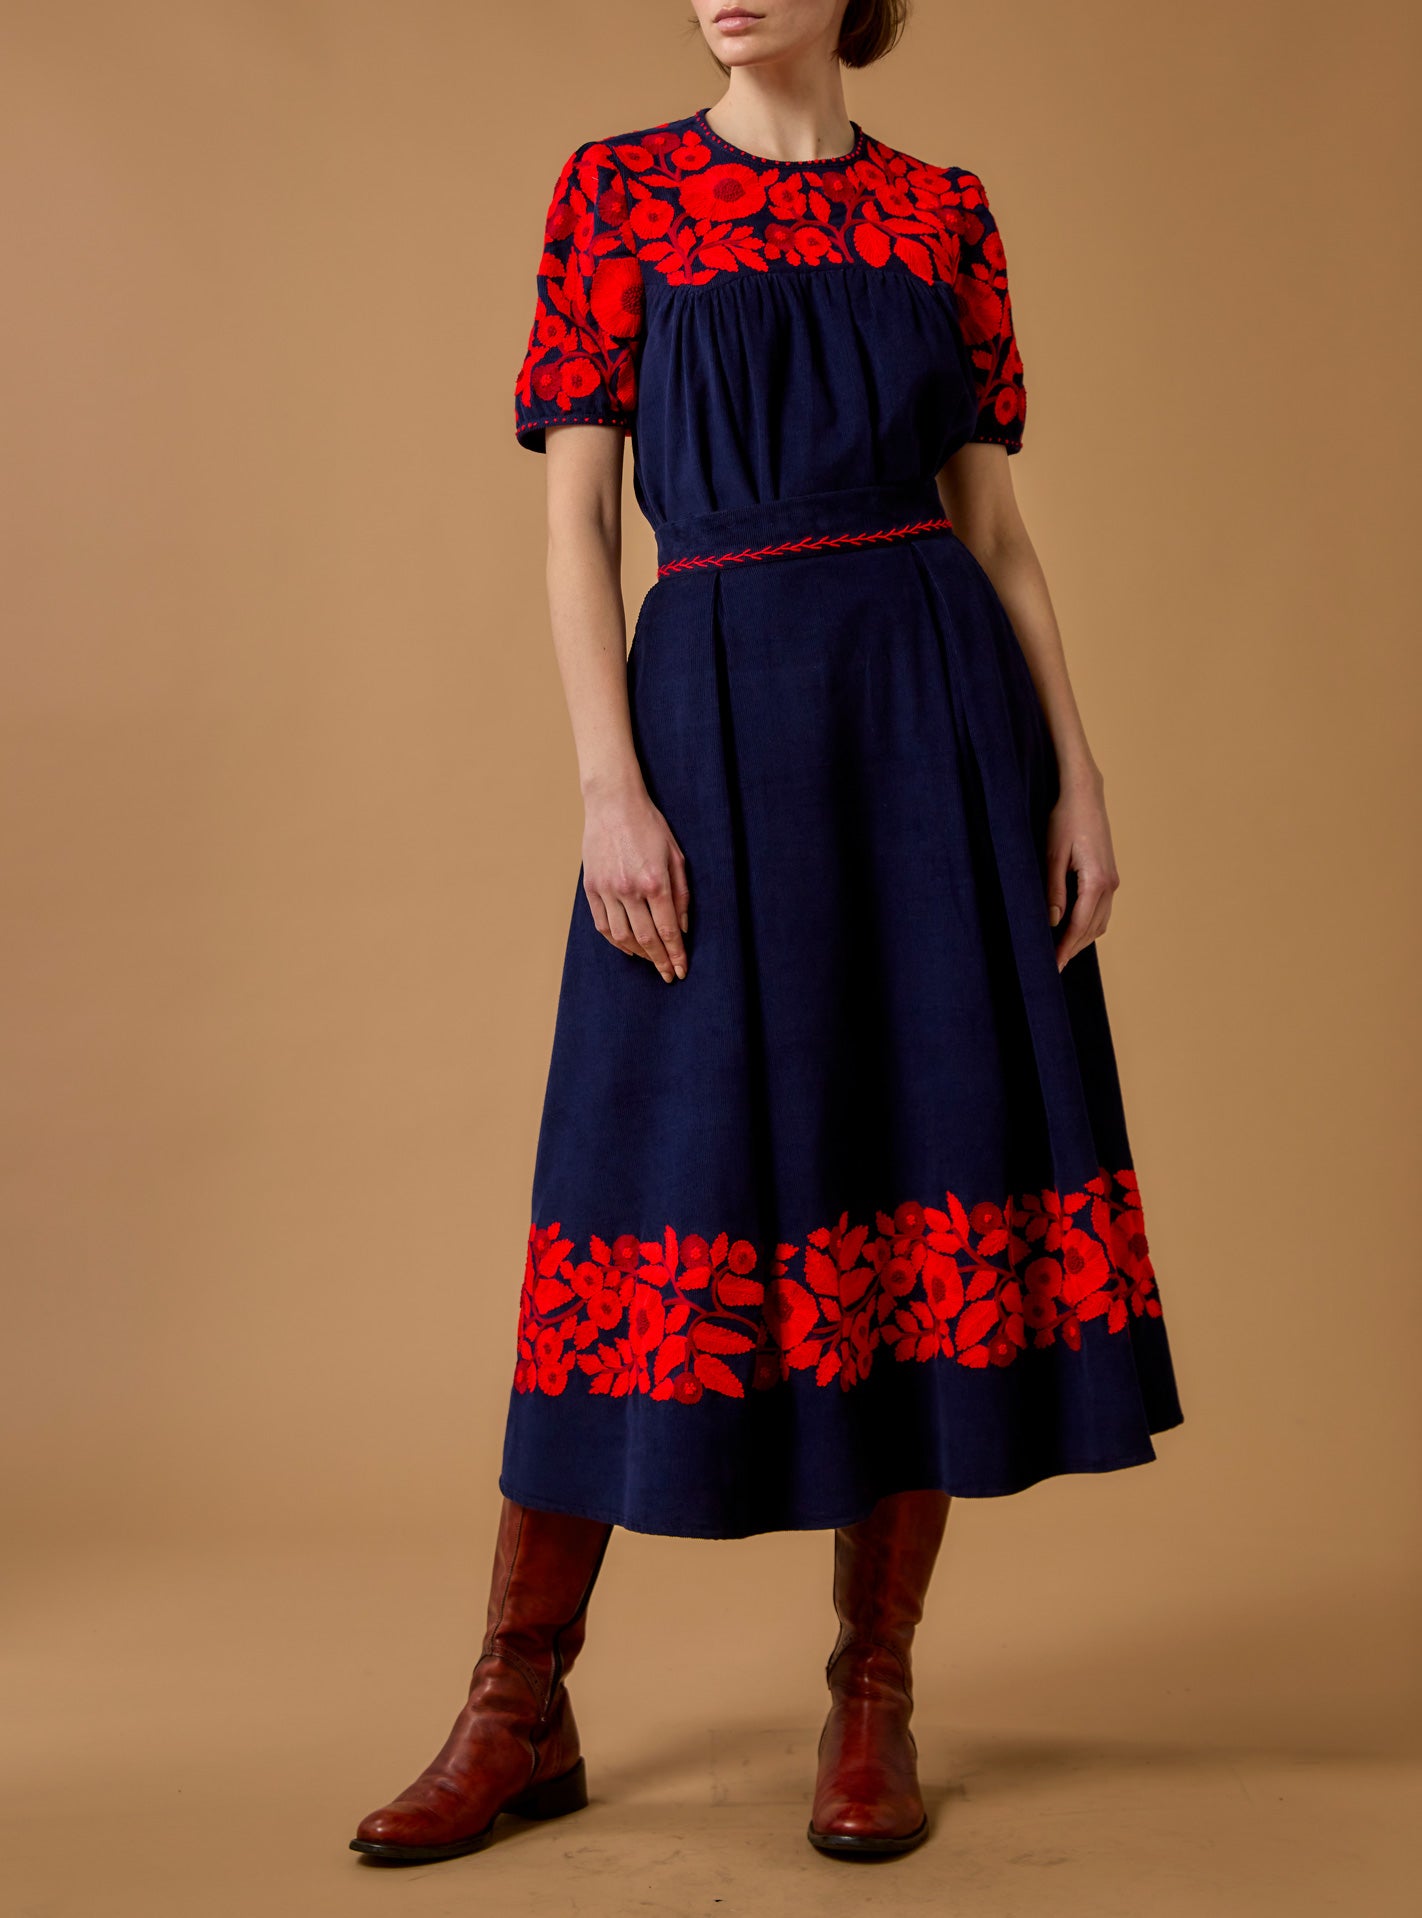 Large View - Olympia Navy/Red Top with Wynona Skirt - Embroidered Corduroy - Thierry Colson